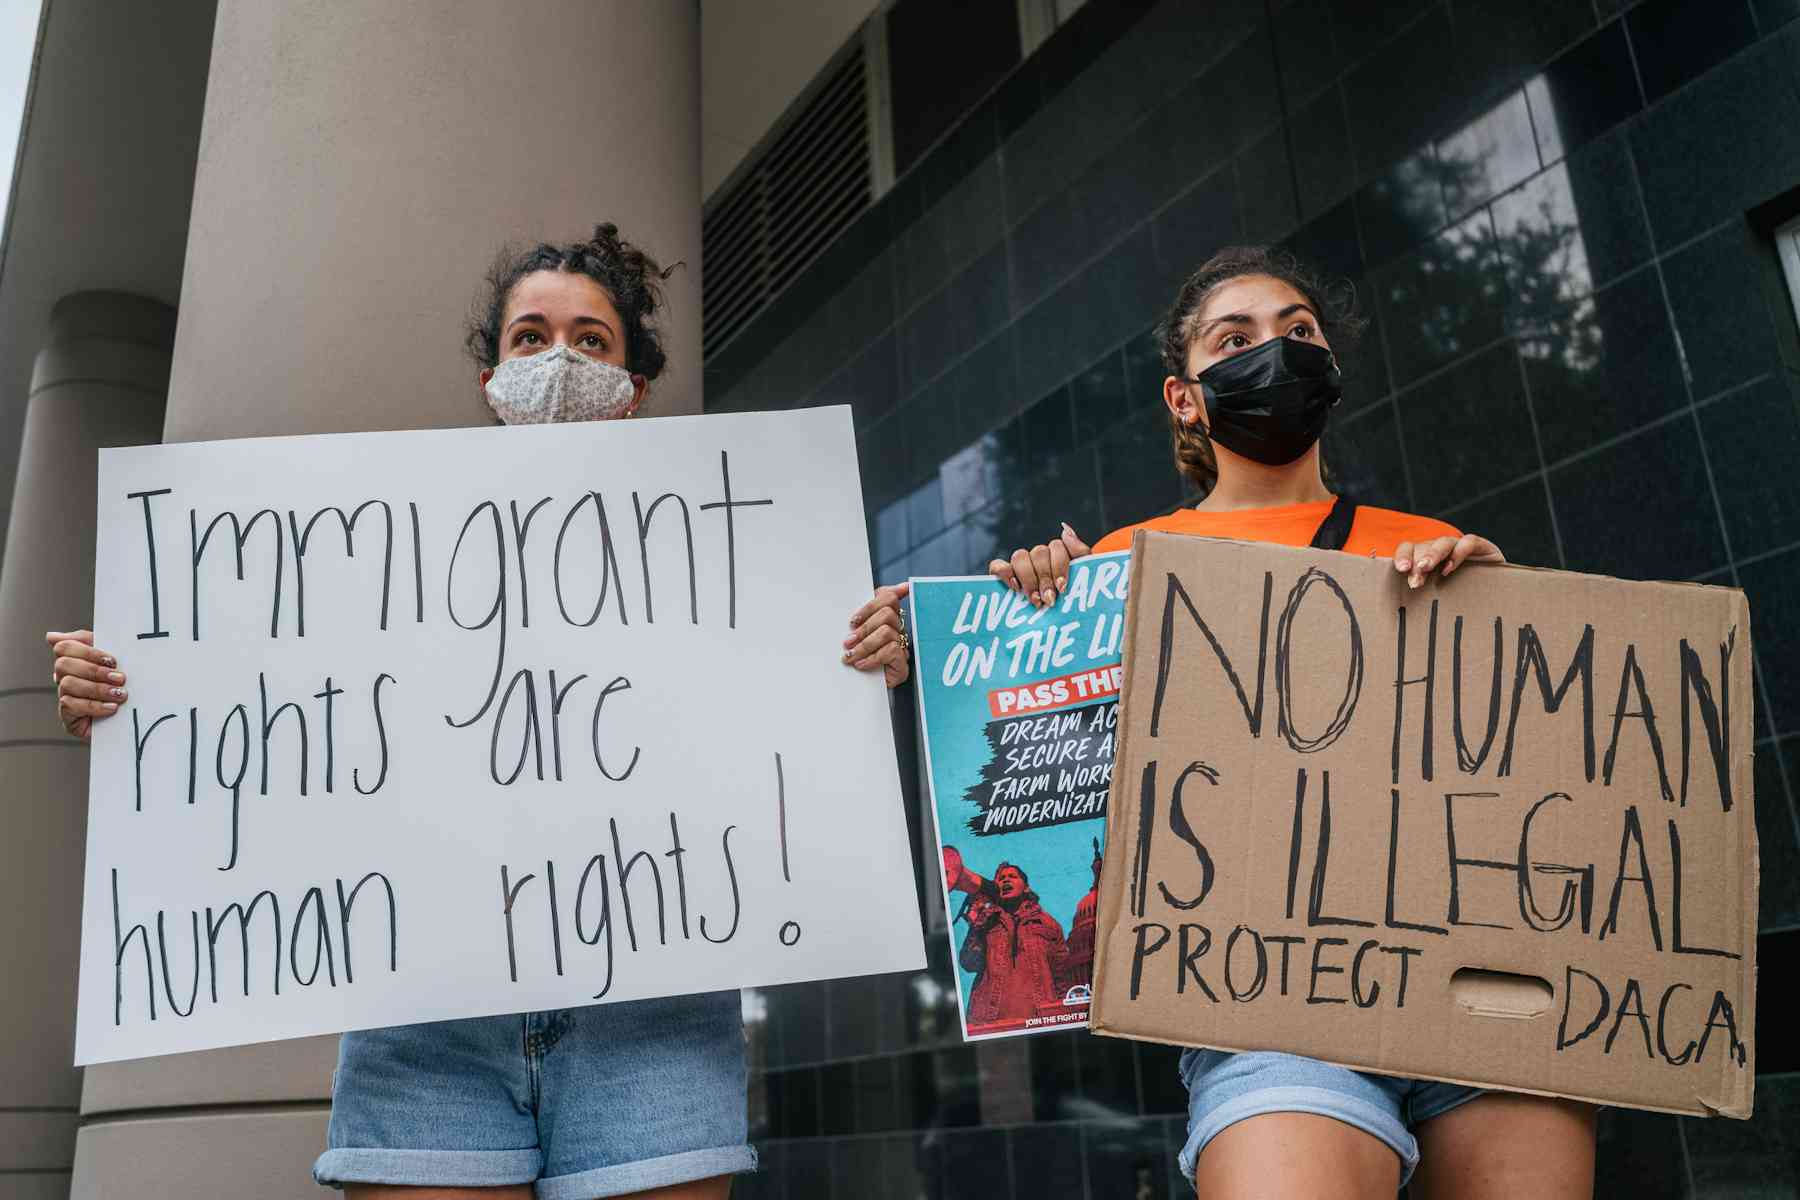 DACA in doubt after court ruling: 3 questions answered